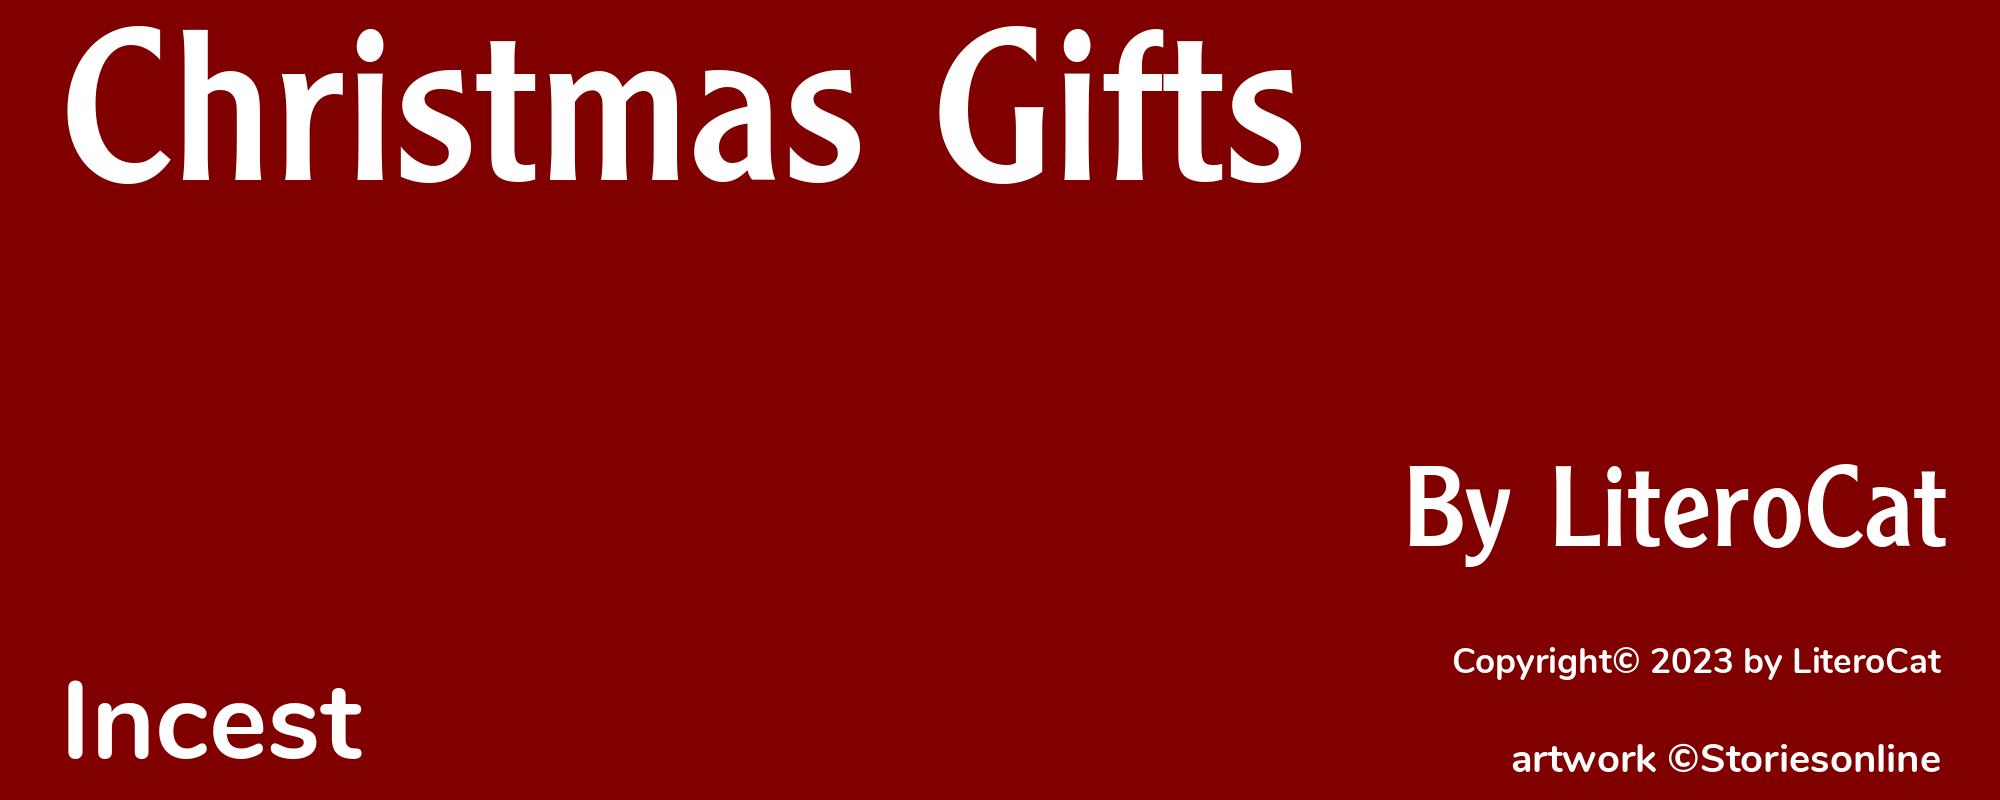 Christmas Gifts - Cover